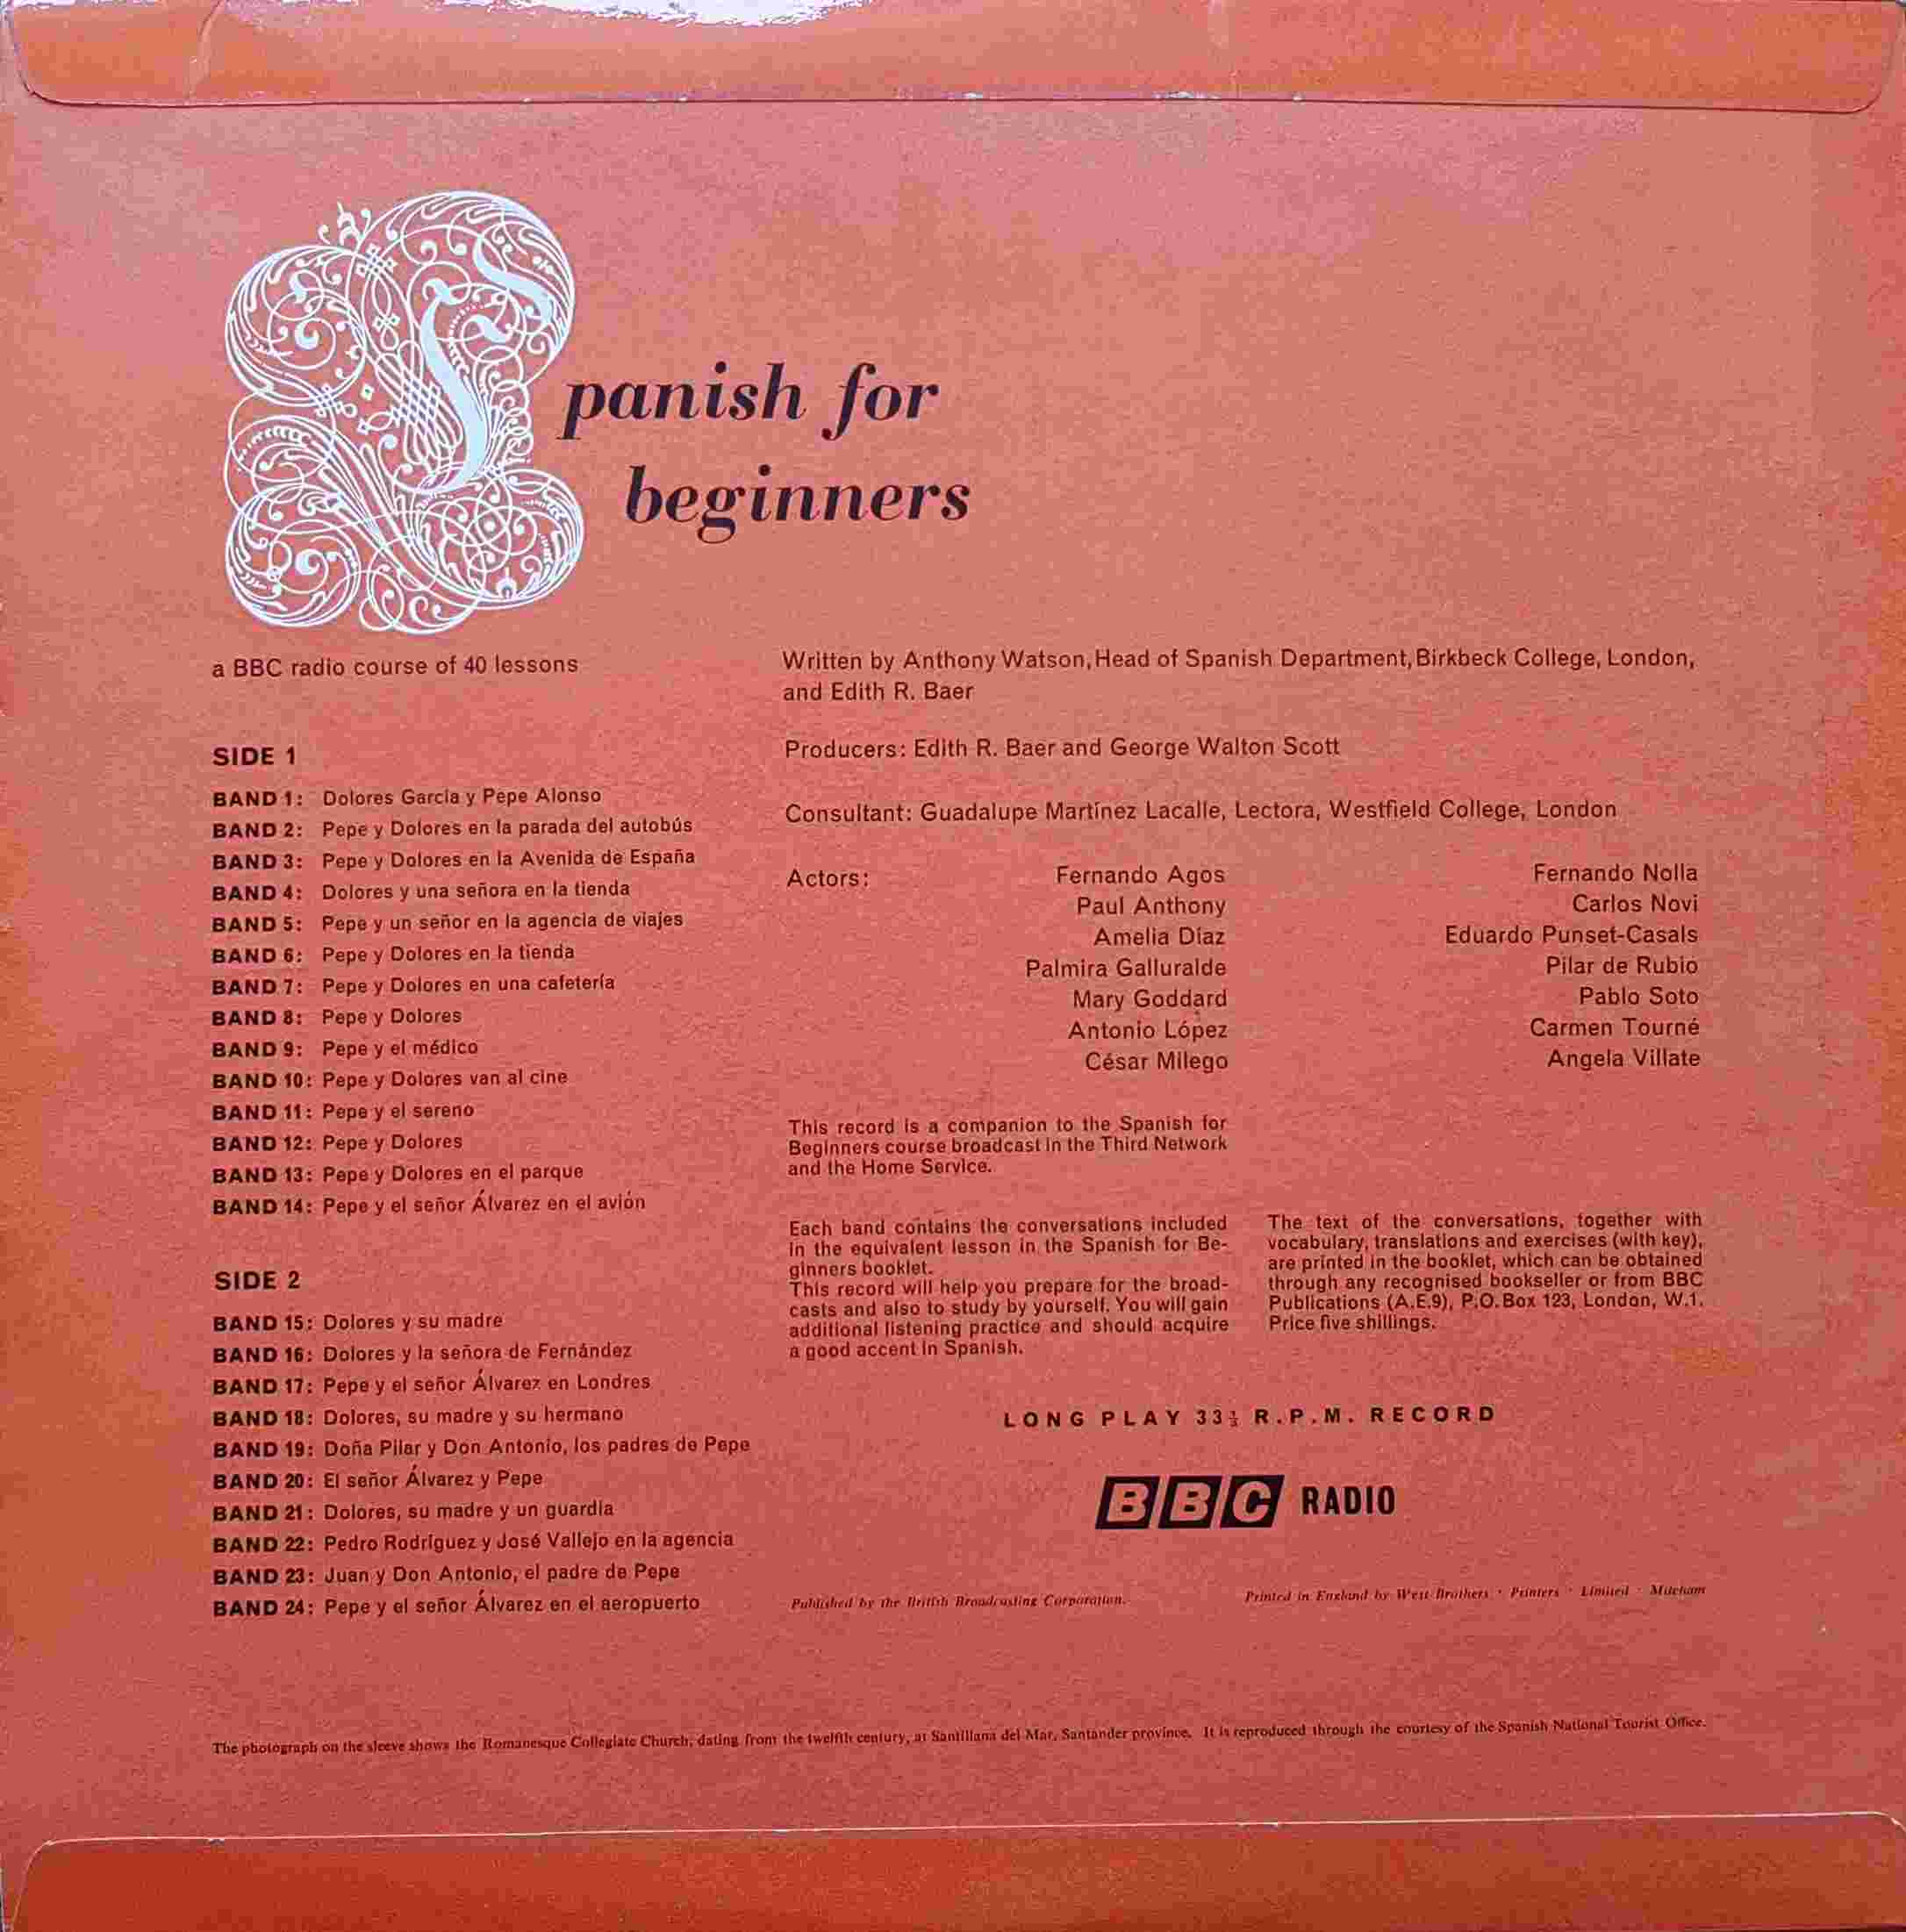 Picture of OP 25/26 Spanish for beginners - Parts 1 - 24 by artist Anthony Watson / Edith R. Baer from the BBC records and Tapes library